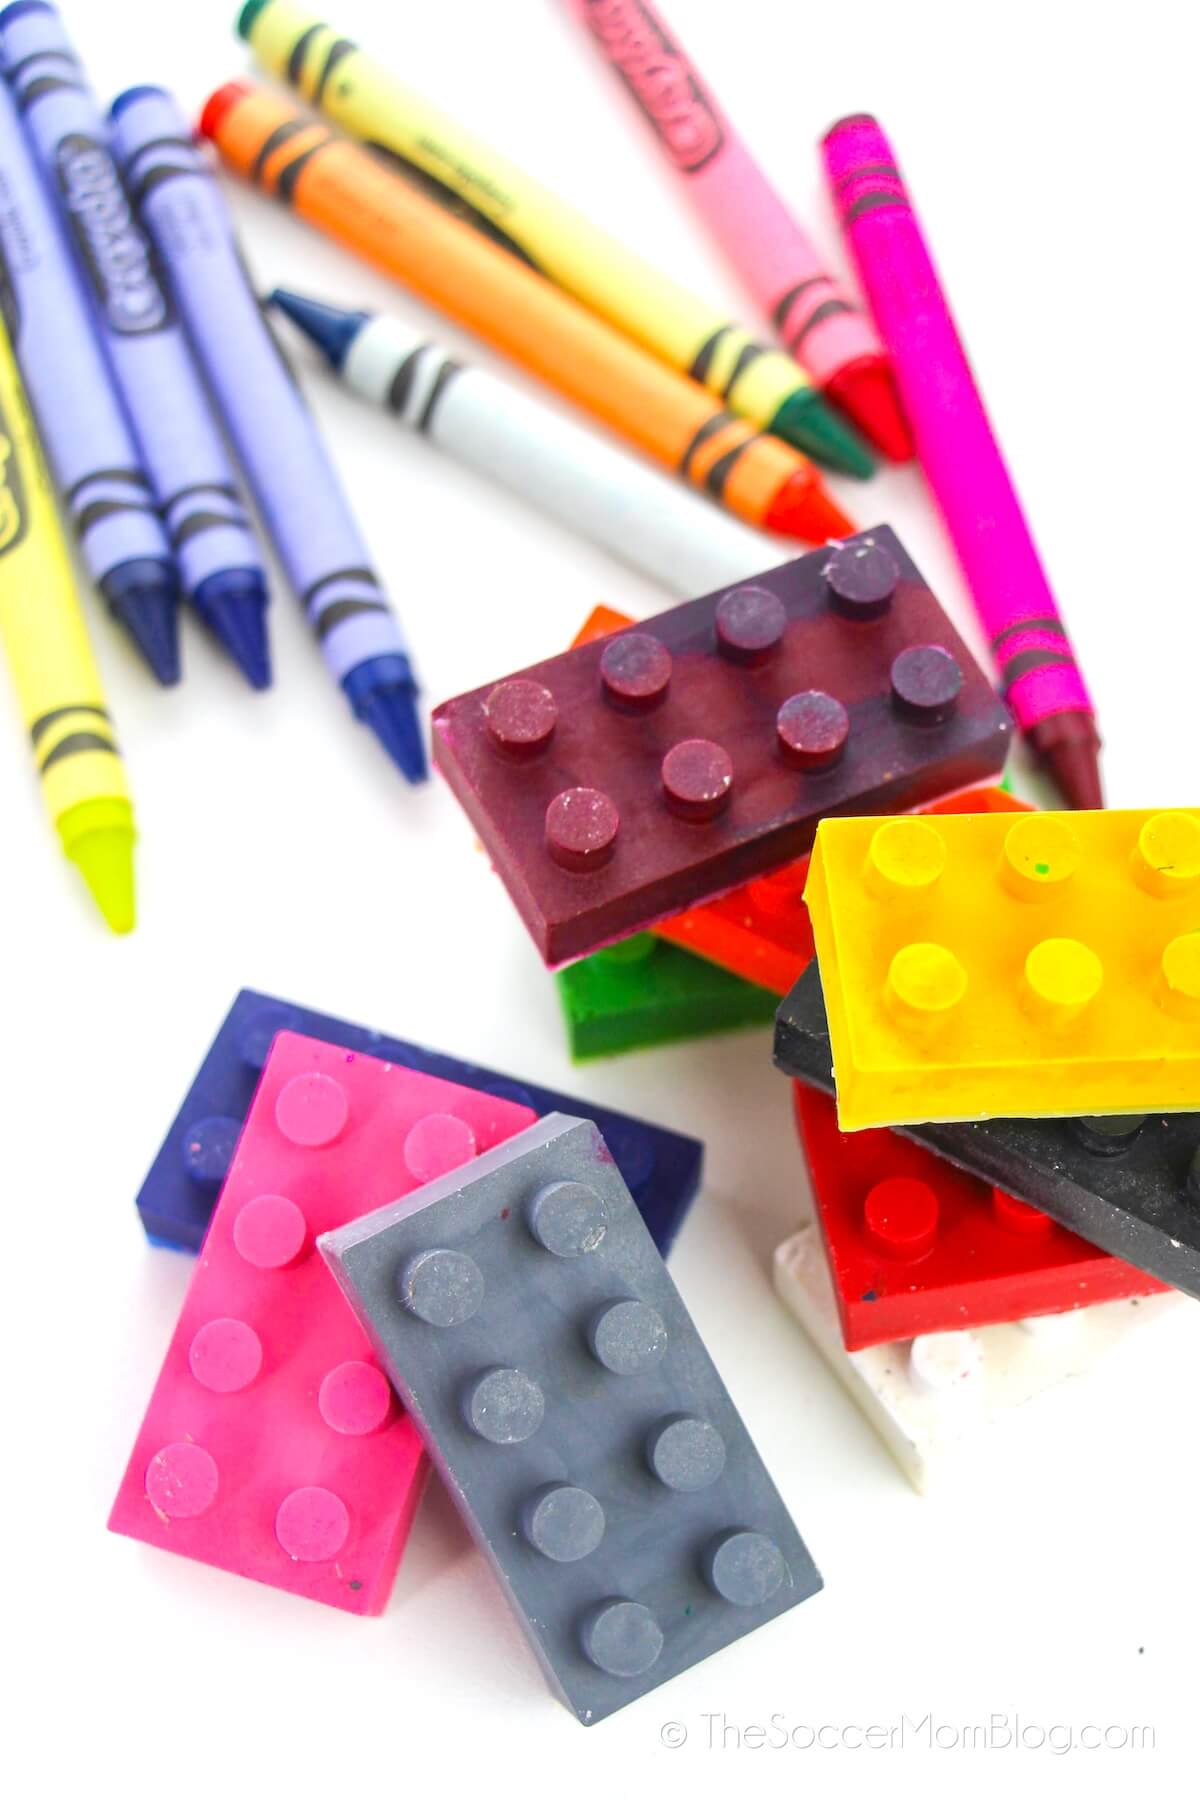 Homemade LEGO crayons, with regular crayons behind them on a white background